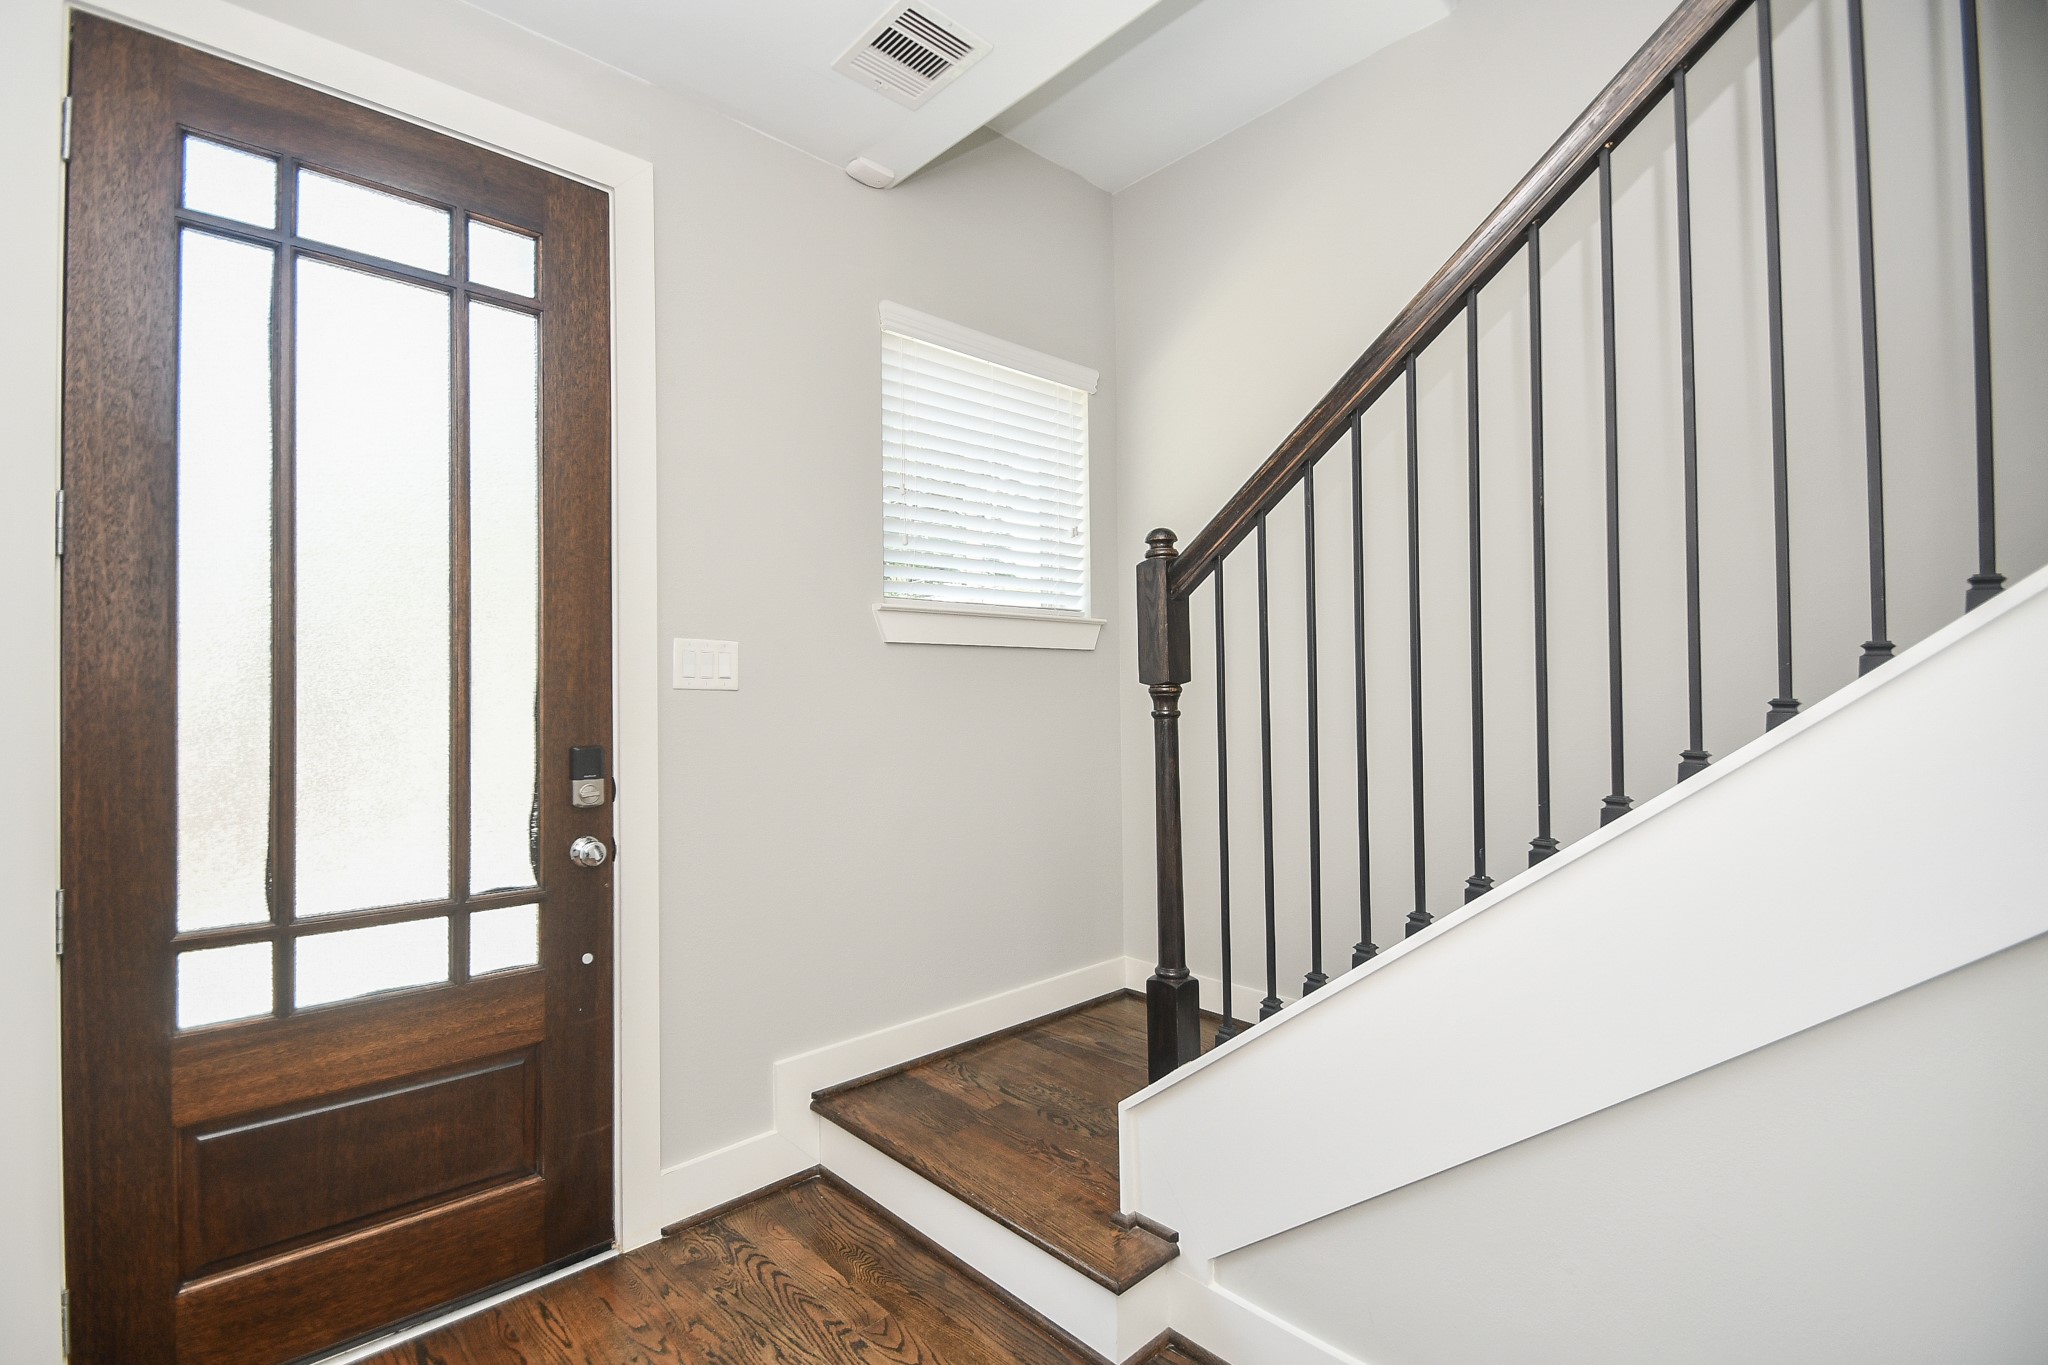 This is your neat, bright and welcoming front entry from the inside; with neutral walls and rich hardwood flooring guiding us to the stunning floors above.